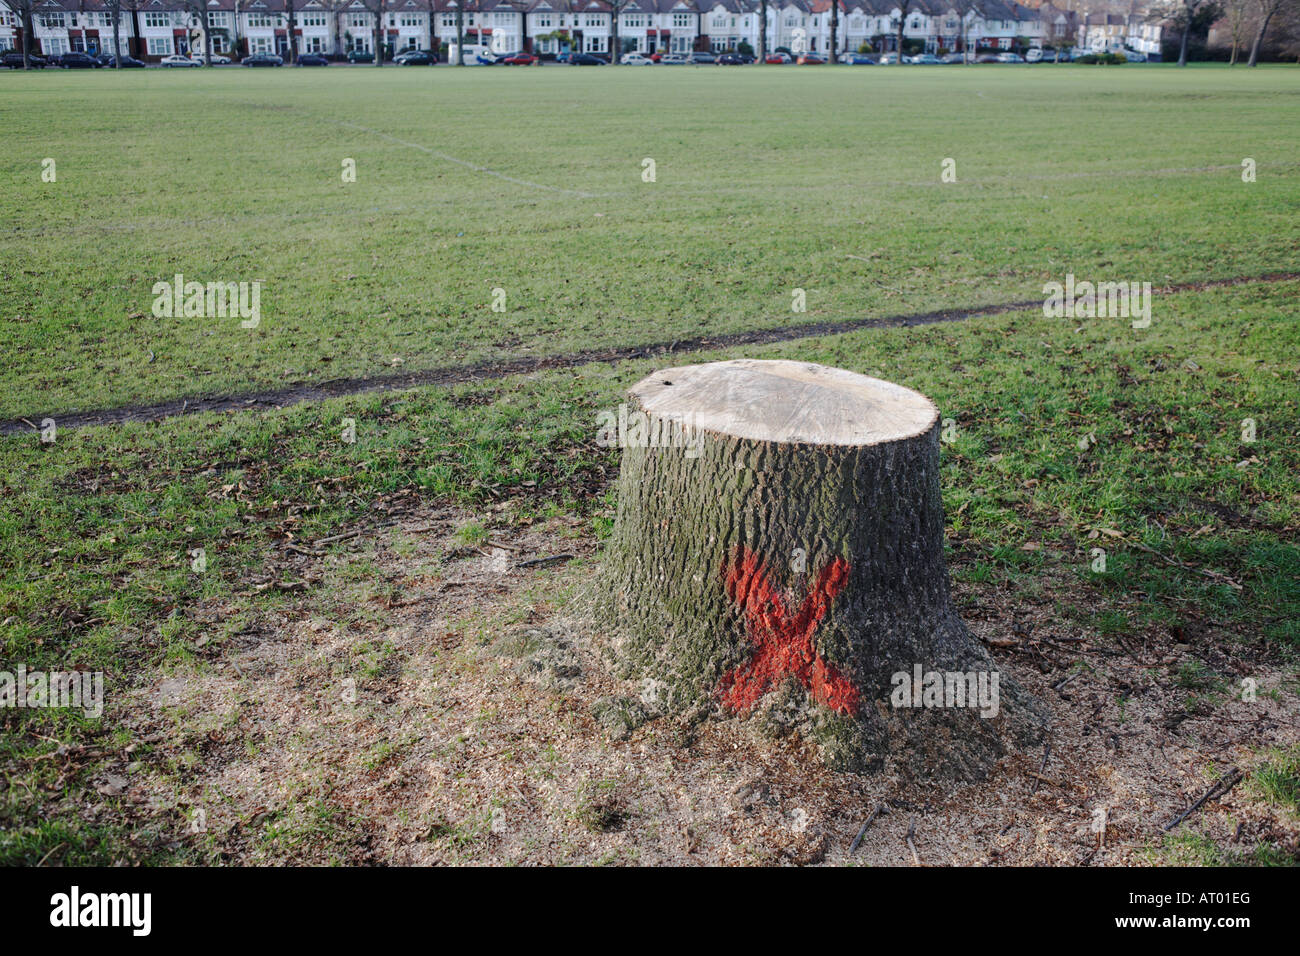 Red cross painted on 100 year-old diseased Ash tree stump in inner-city London Park marking which tree due for sawing down Stock Photo